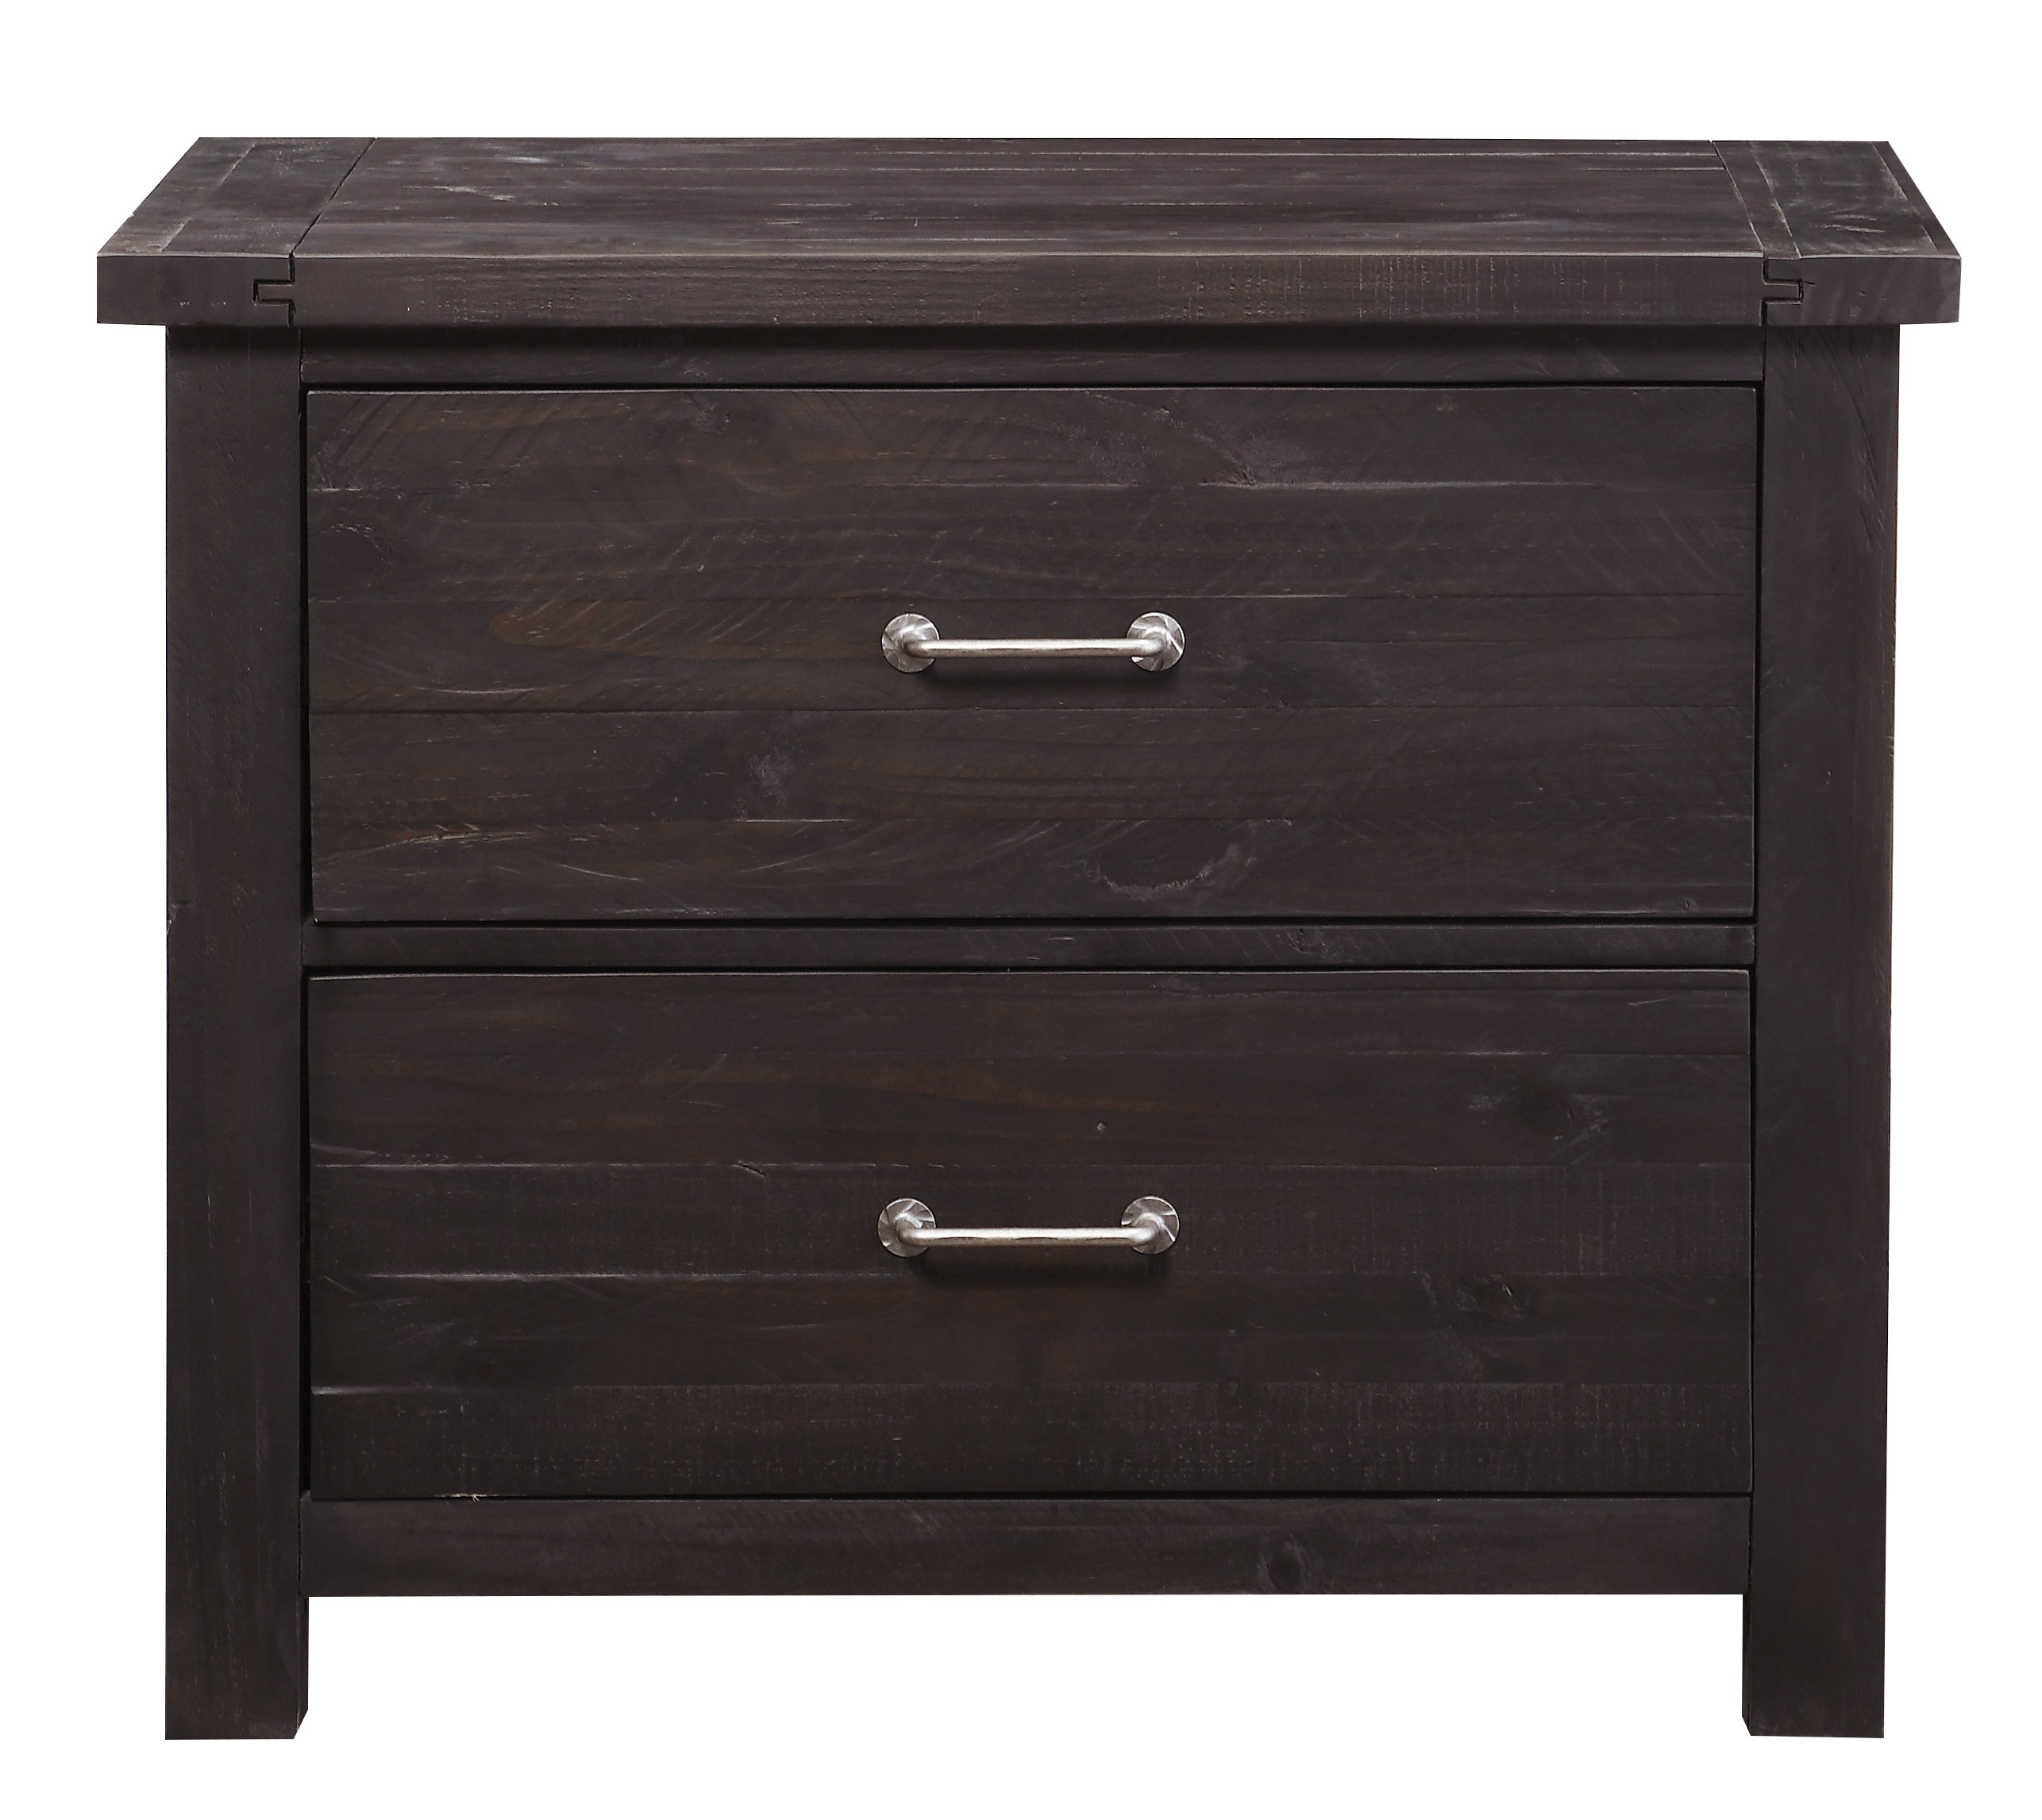 Langsa Solid Wood 2 Drawer Lateral Filing Cabinet Allmodern within measurements 2572 X 2292